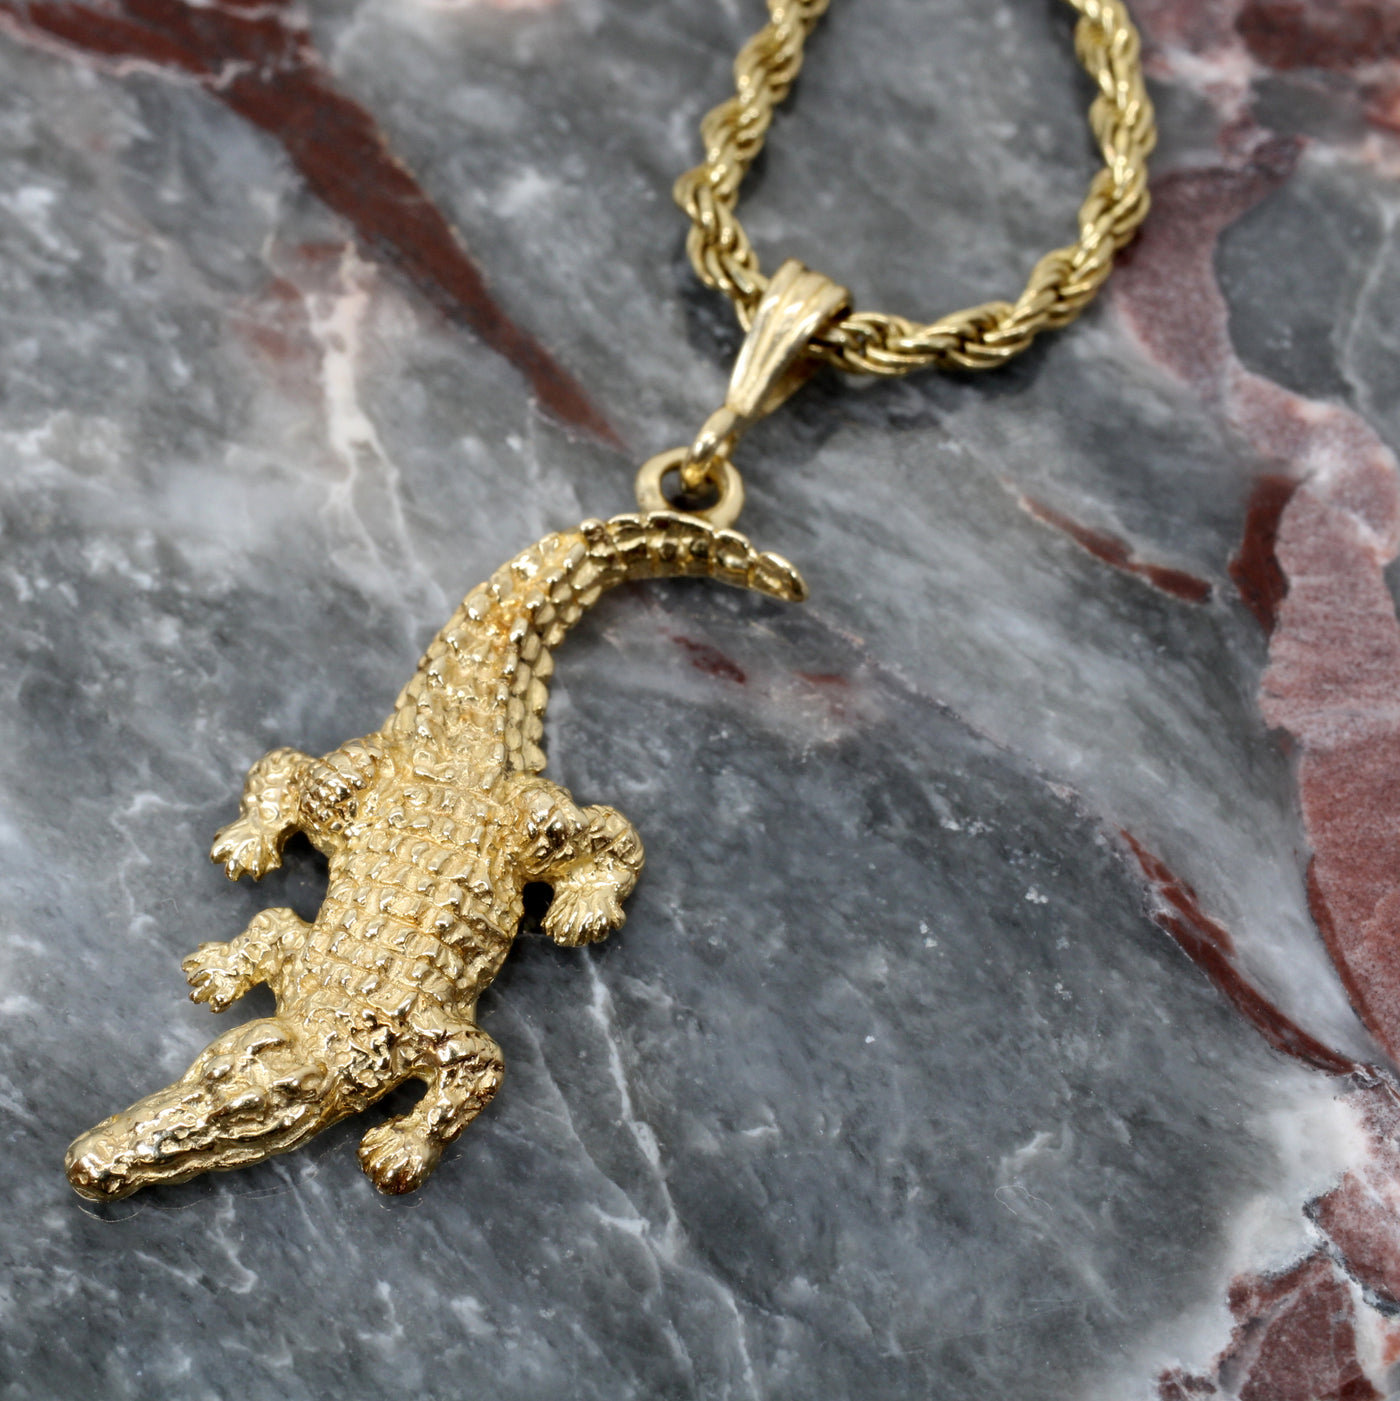 Mans Large Alligator Necklace in 14kt Yellow Gold On Heavy Rope Chain Gator with 18 Rope Chain